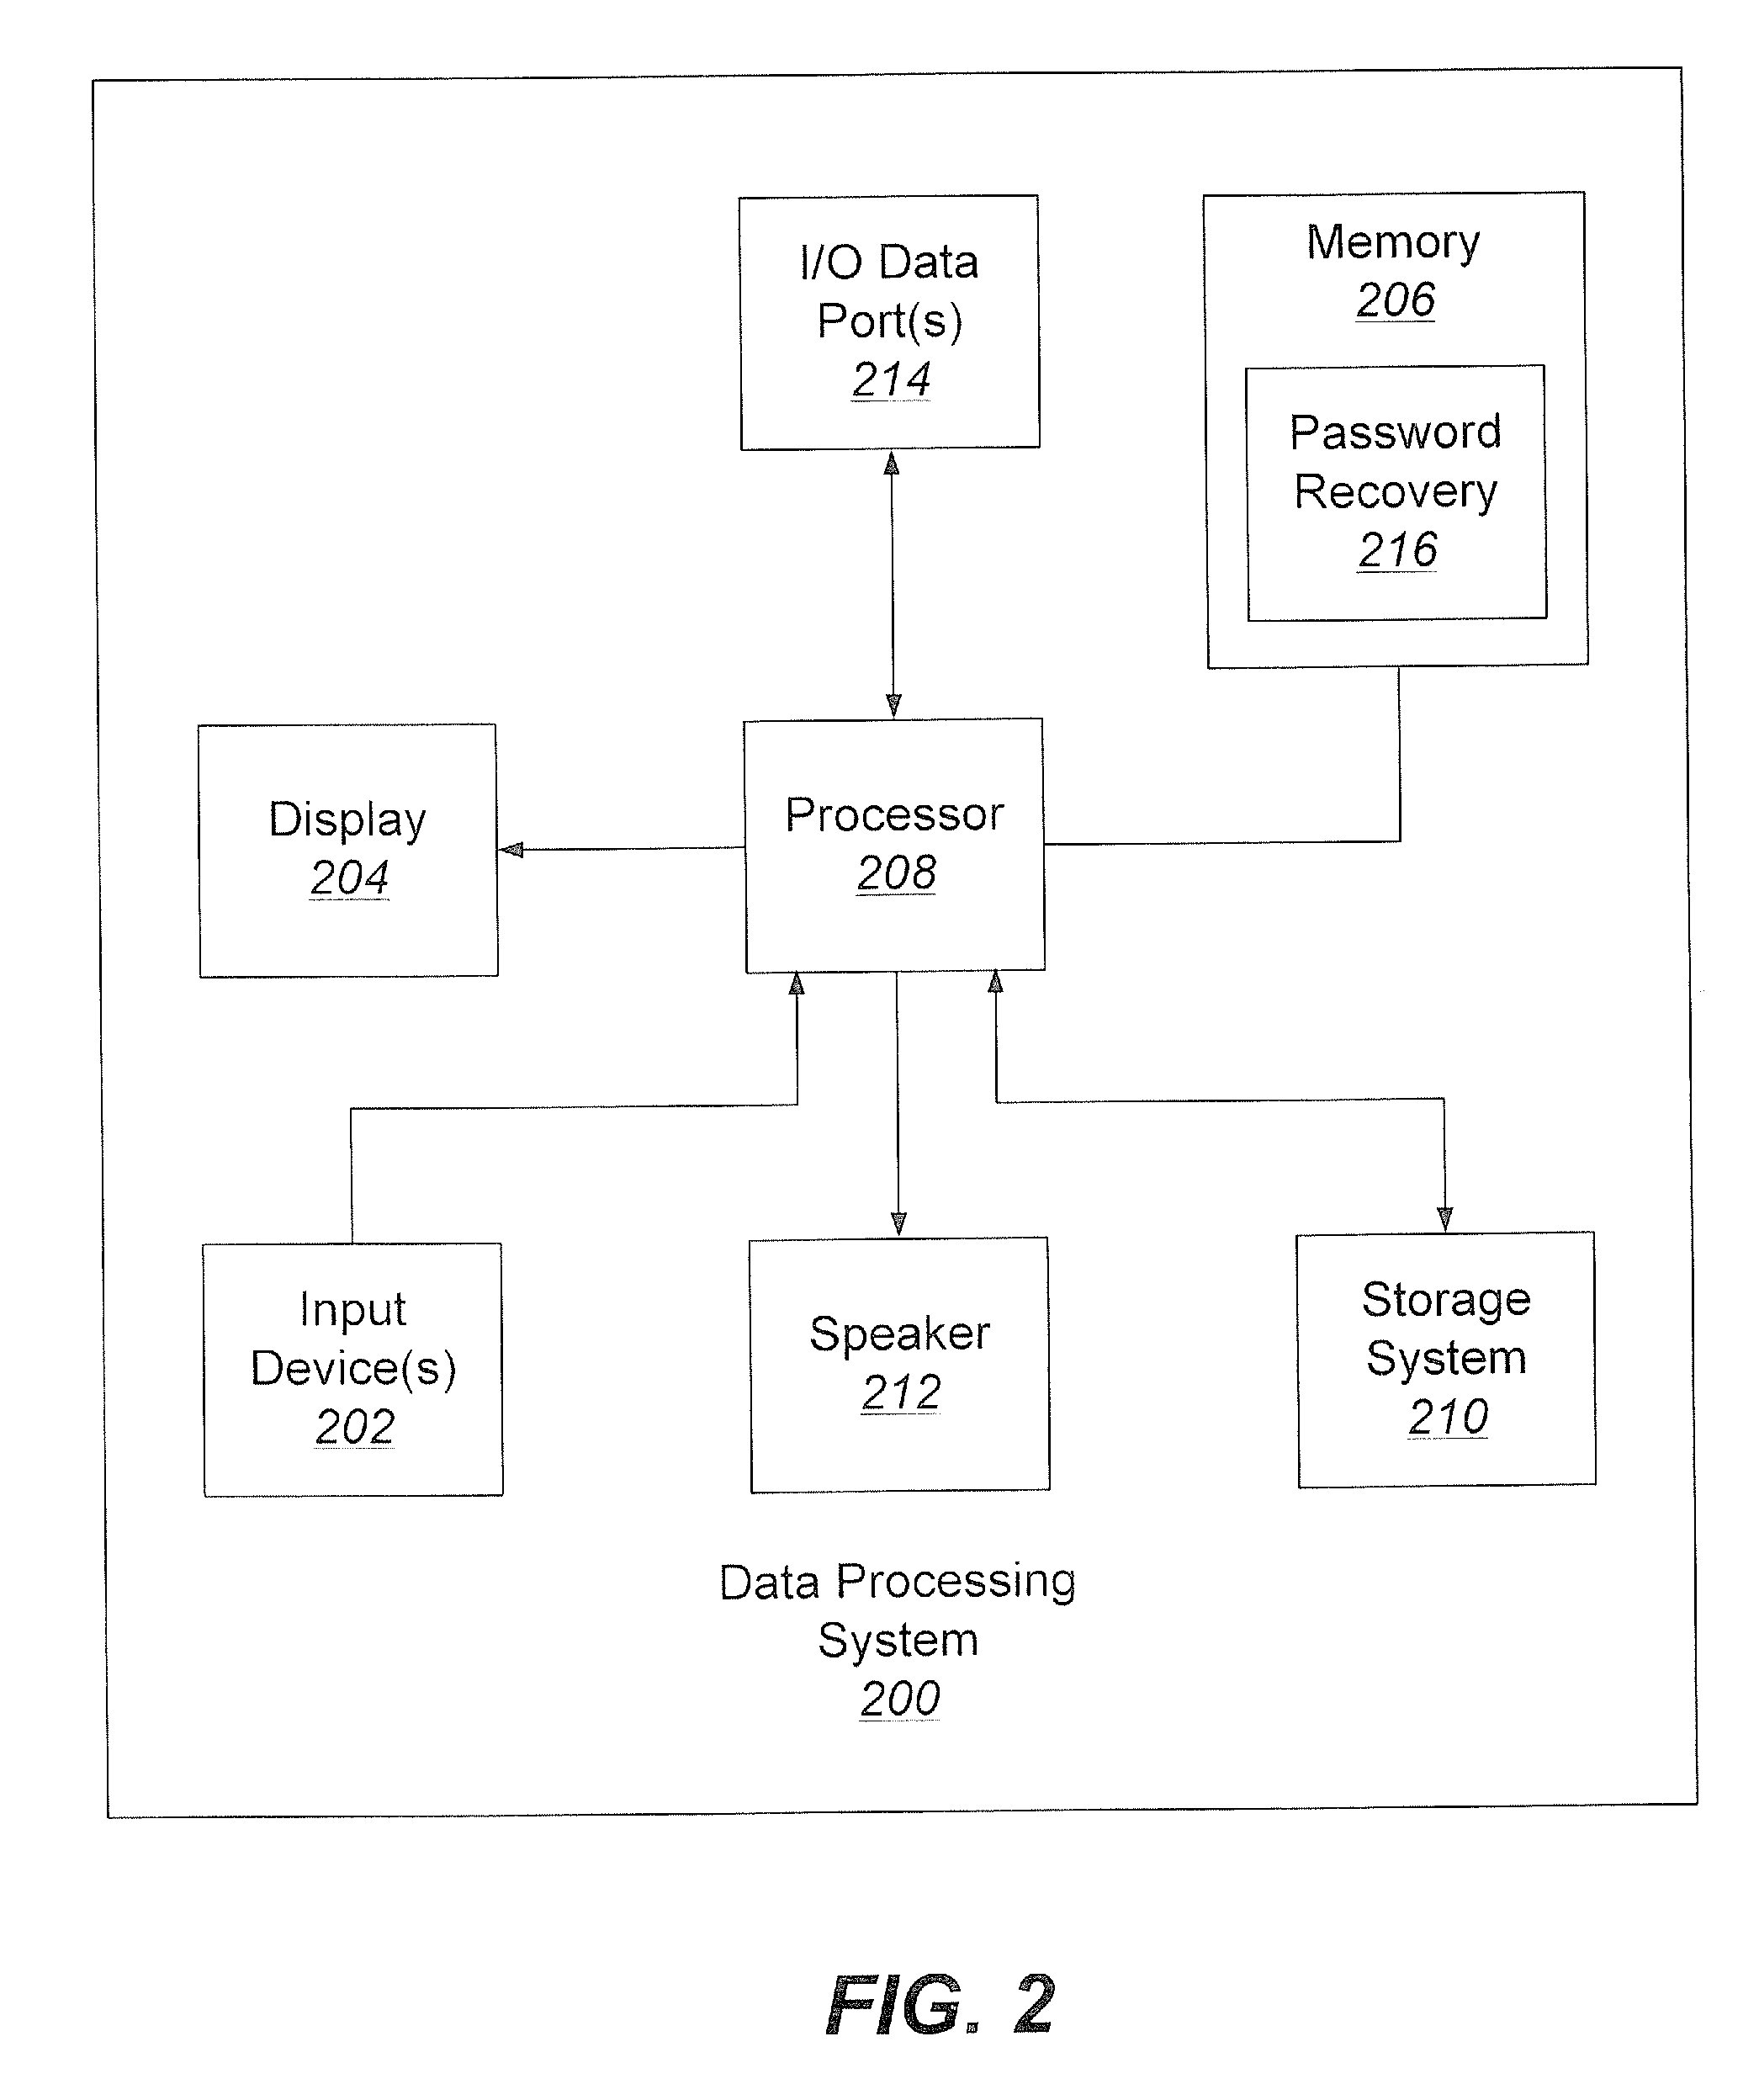 Methods, systems, and computer program products for recovering a password using user-selected third party authorization